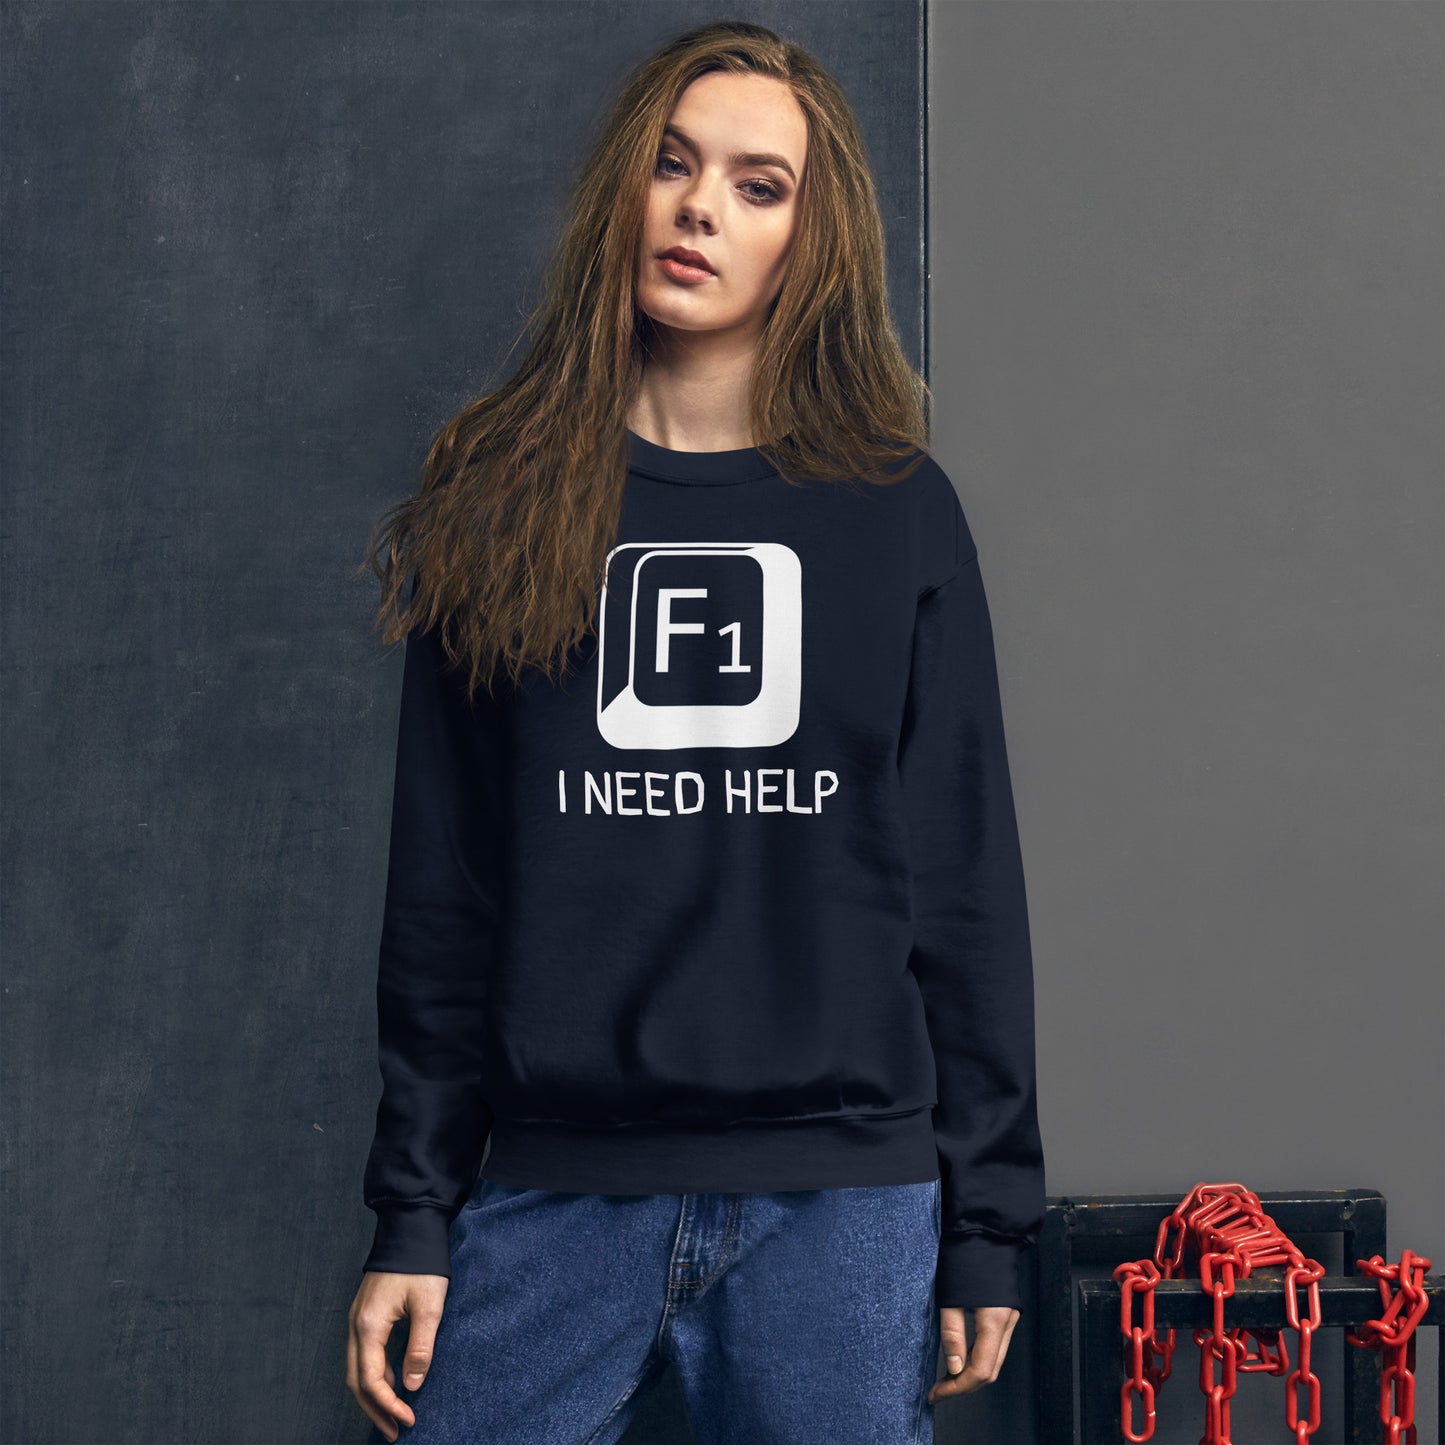 Women with navy sweatshirt and a picture of F1 key with text "I need help"